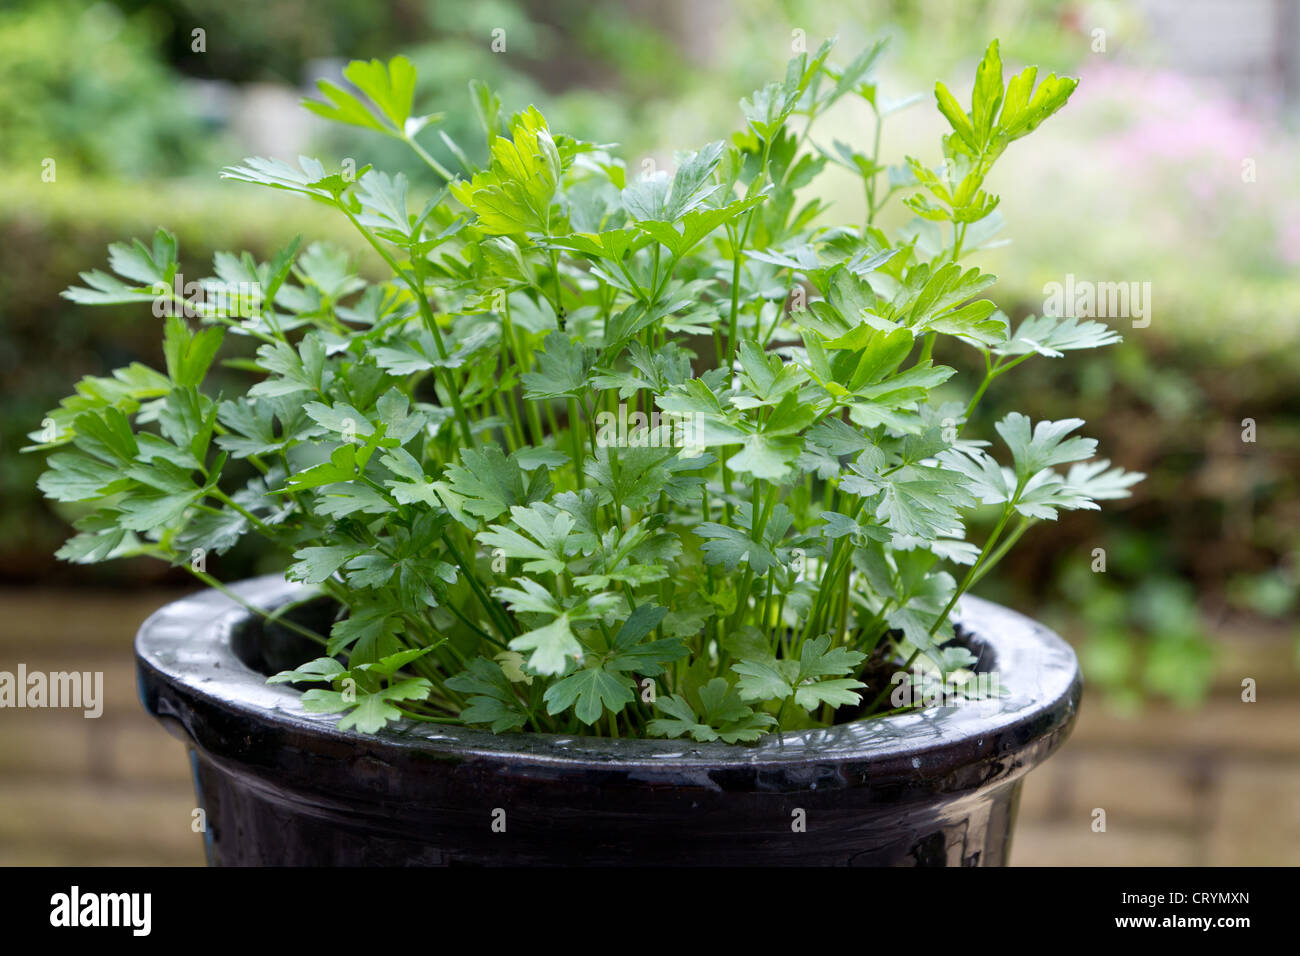 Closeup of a flat leaf parsley plant in a pot Stock Photo